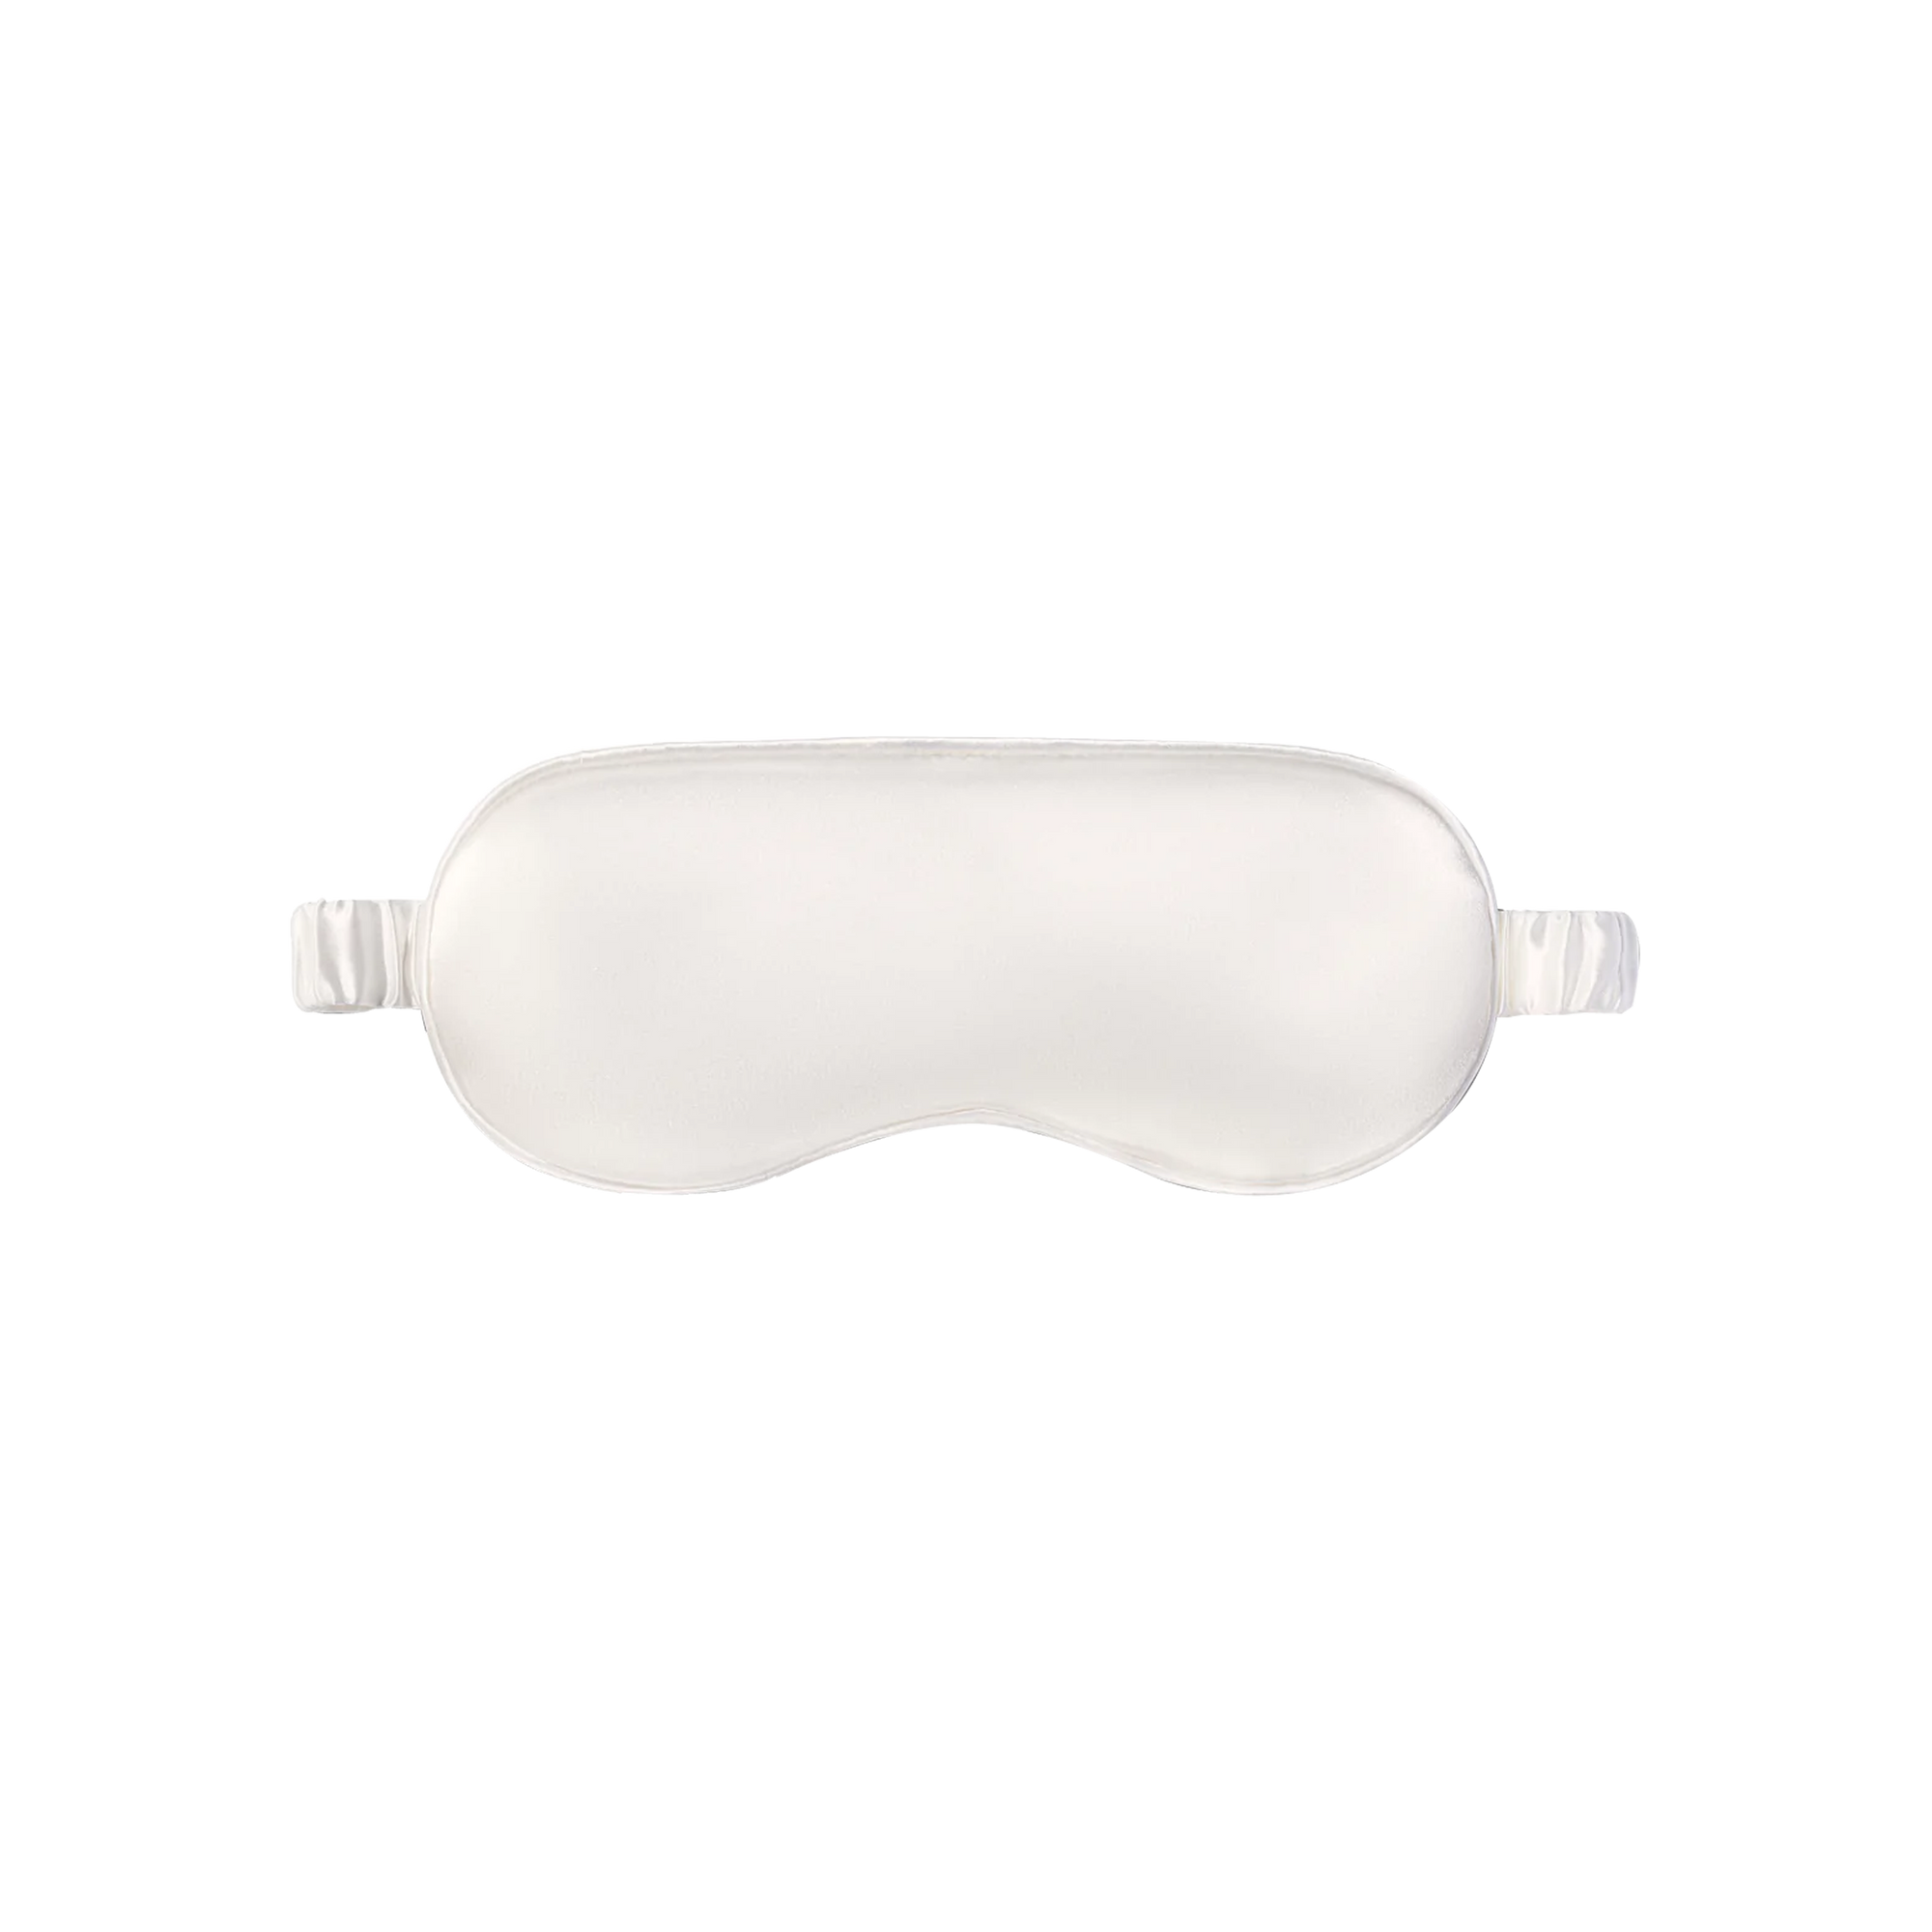 The Silk Sleep Mask is made with the highest grade (6A) long fiber mulberry silk, with a thickness of 22 momme and non-toxic dyes.